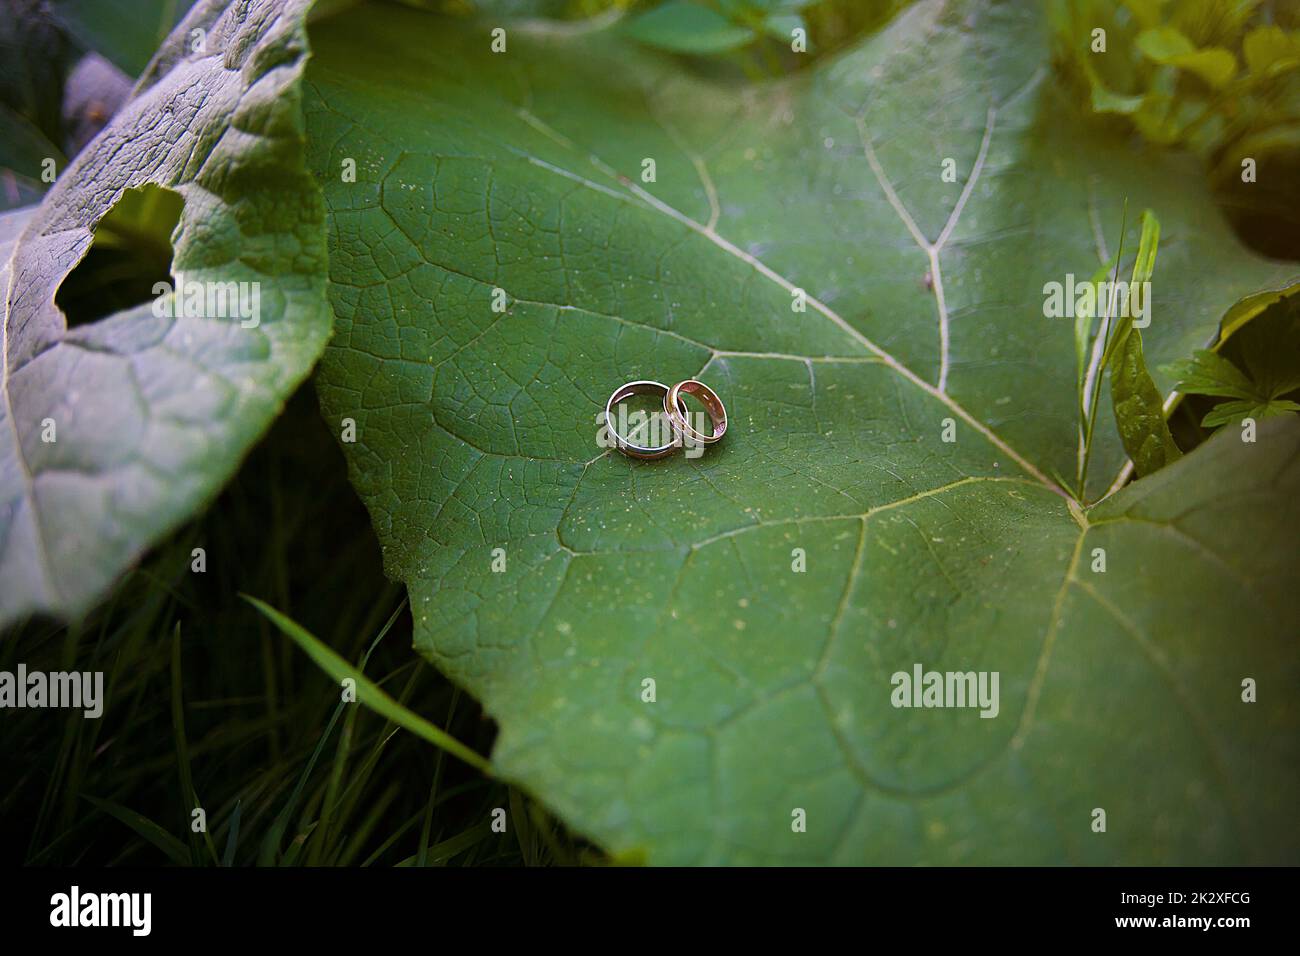 Two Golden wedding rings lie on leaves plant. Stock Photo